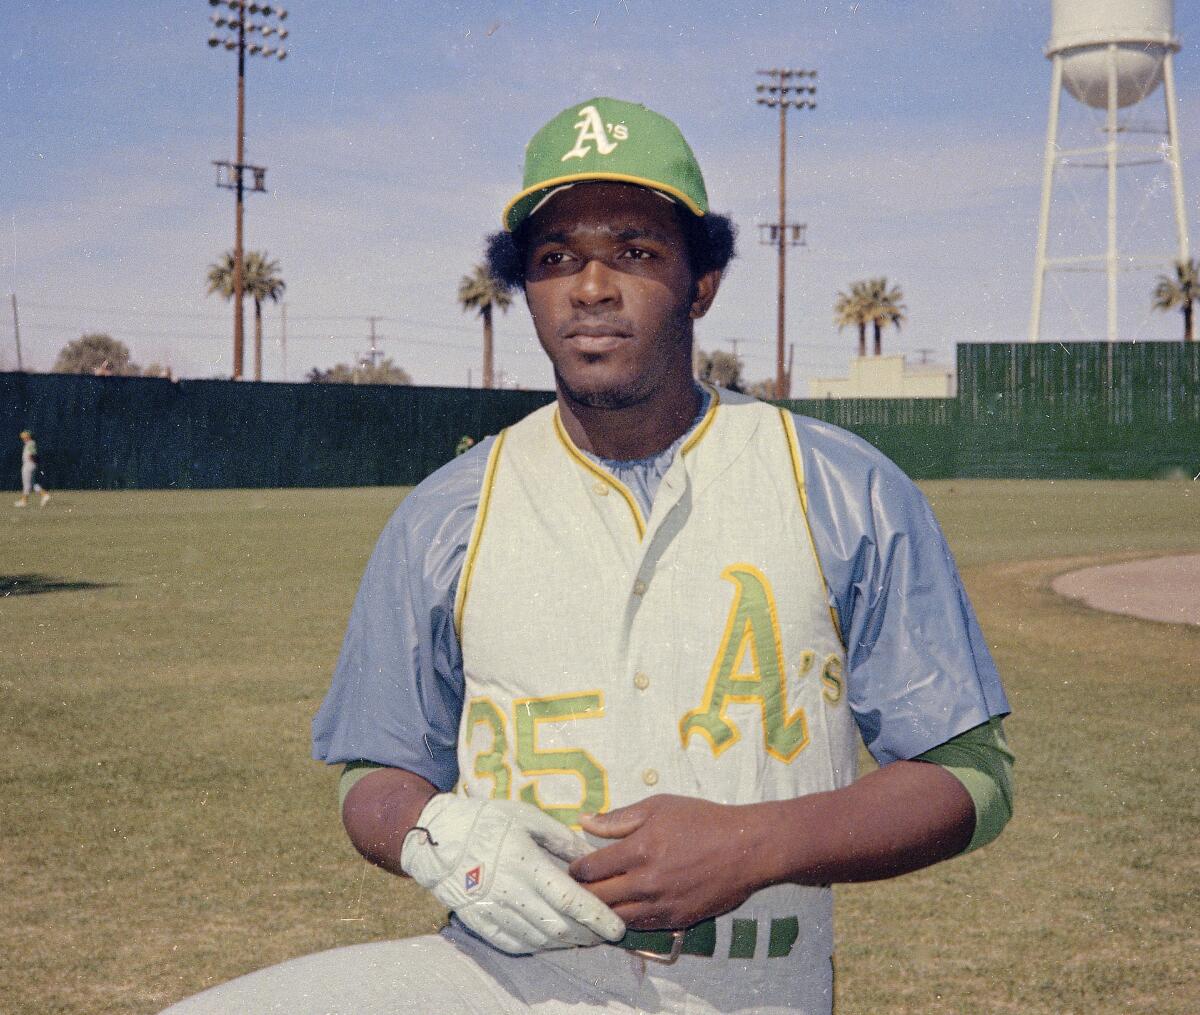 Vida Blue, hard-throwing A's pitcher from 1970s, dies at 73 - Los Angeles  Times